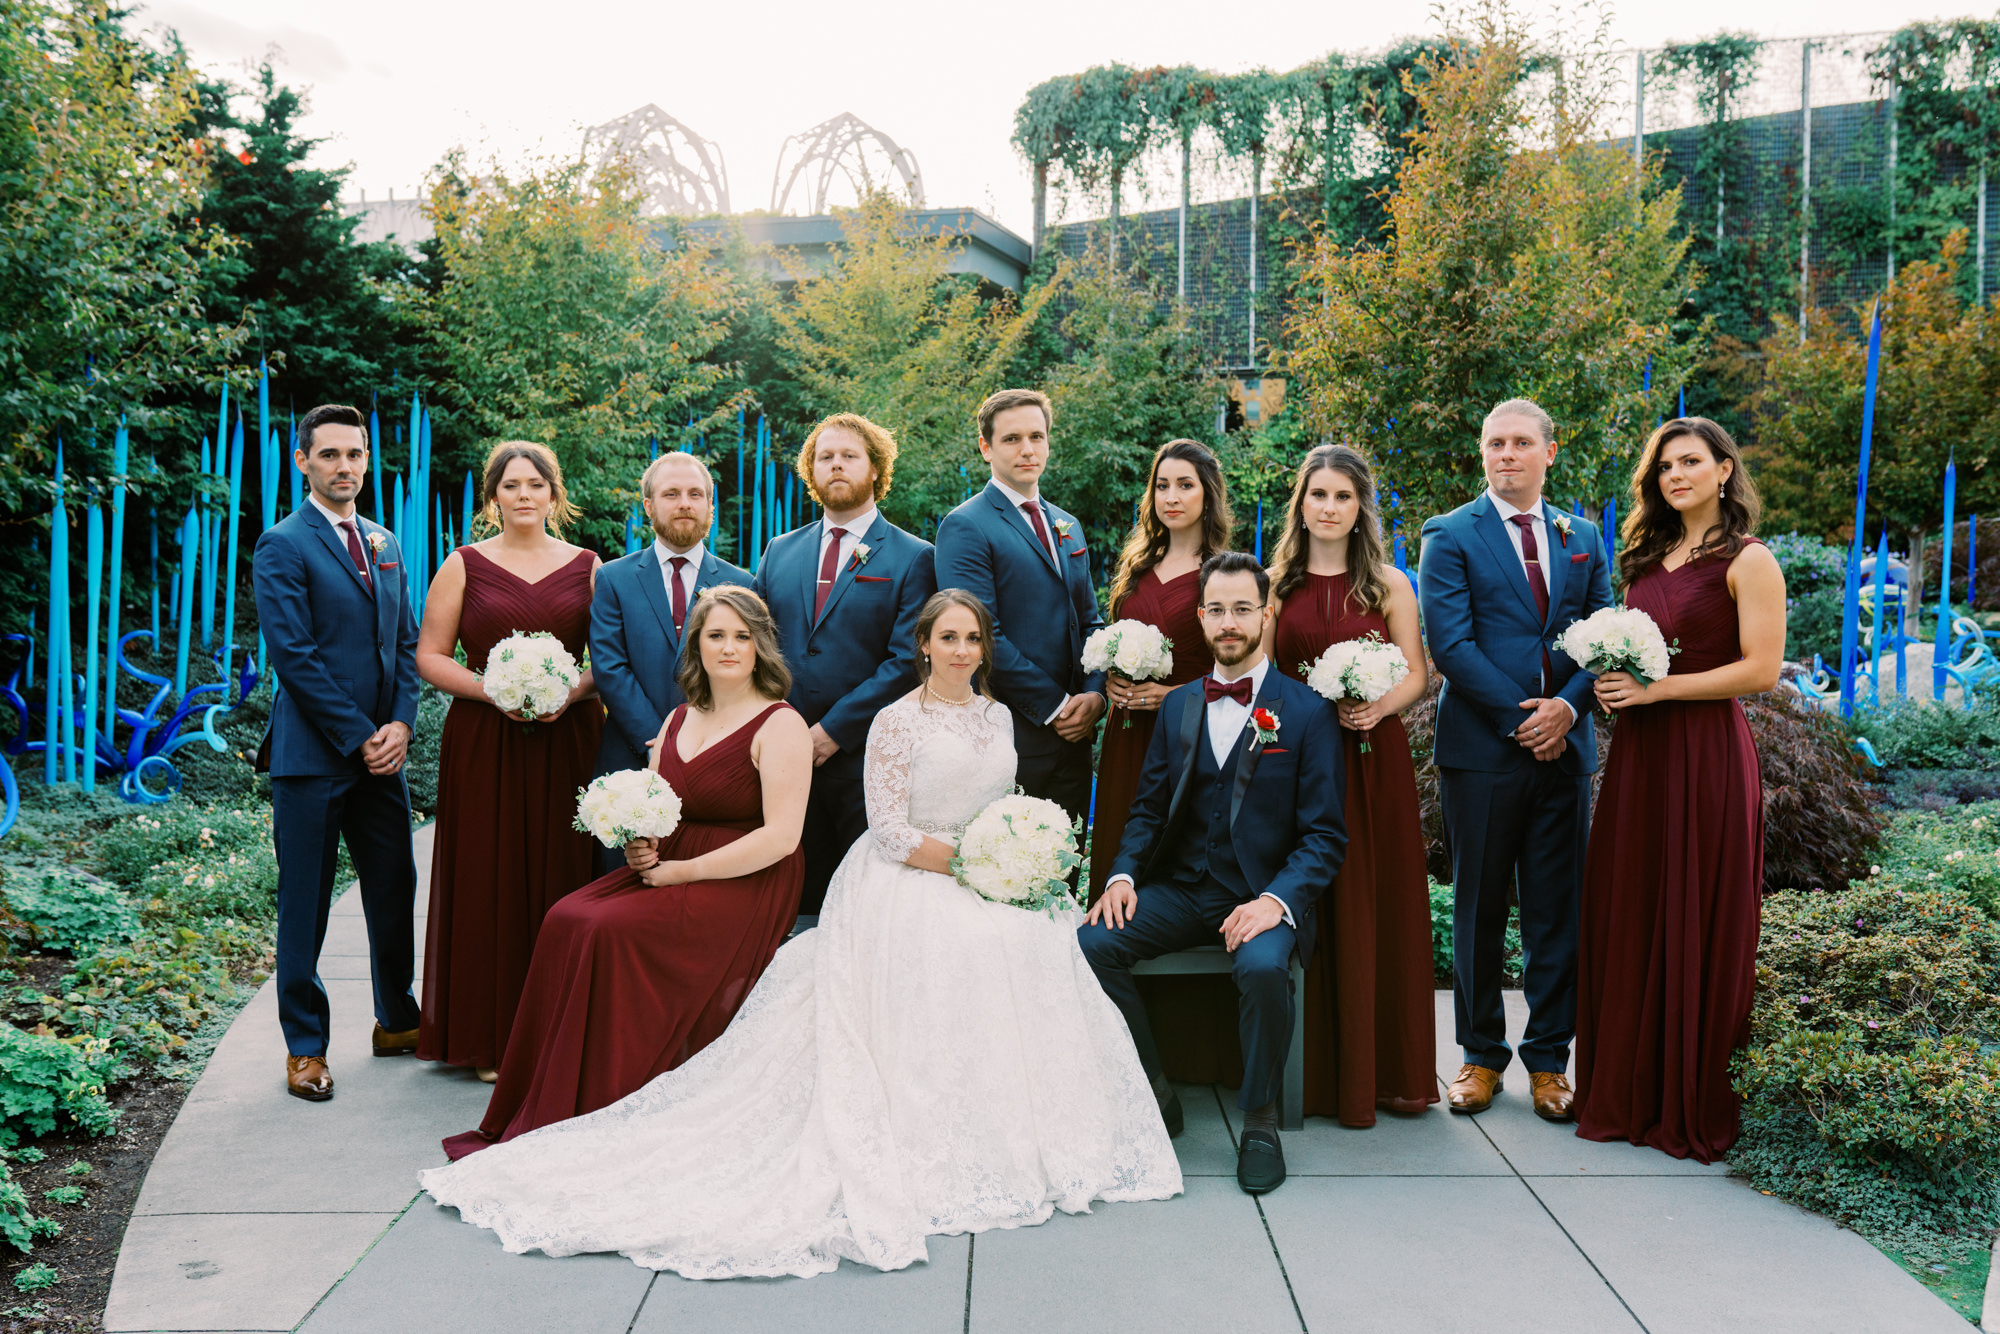 Lauren and Kyle with their wedding party in blue and maroon